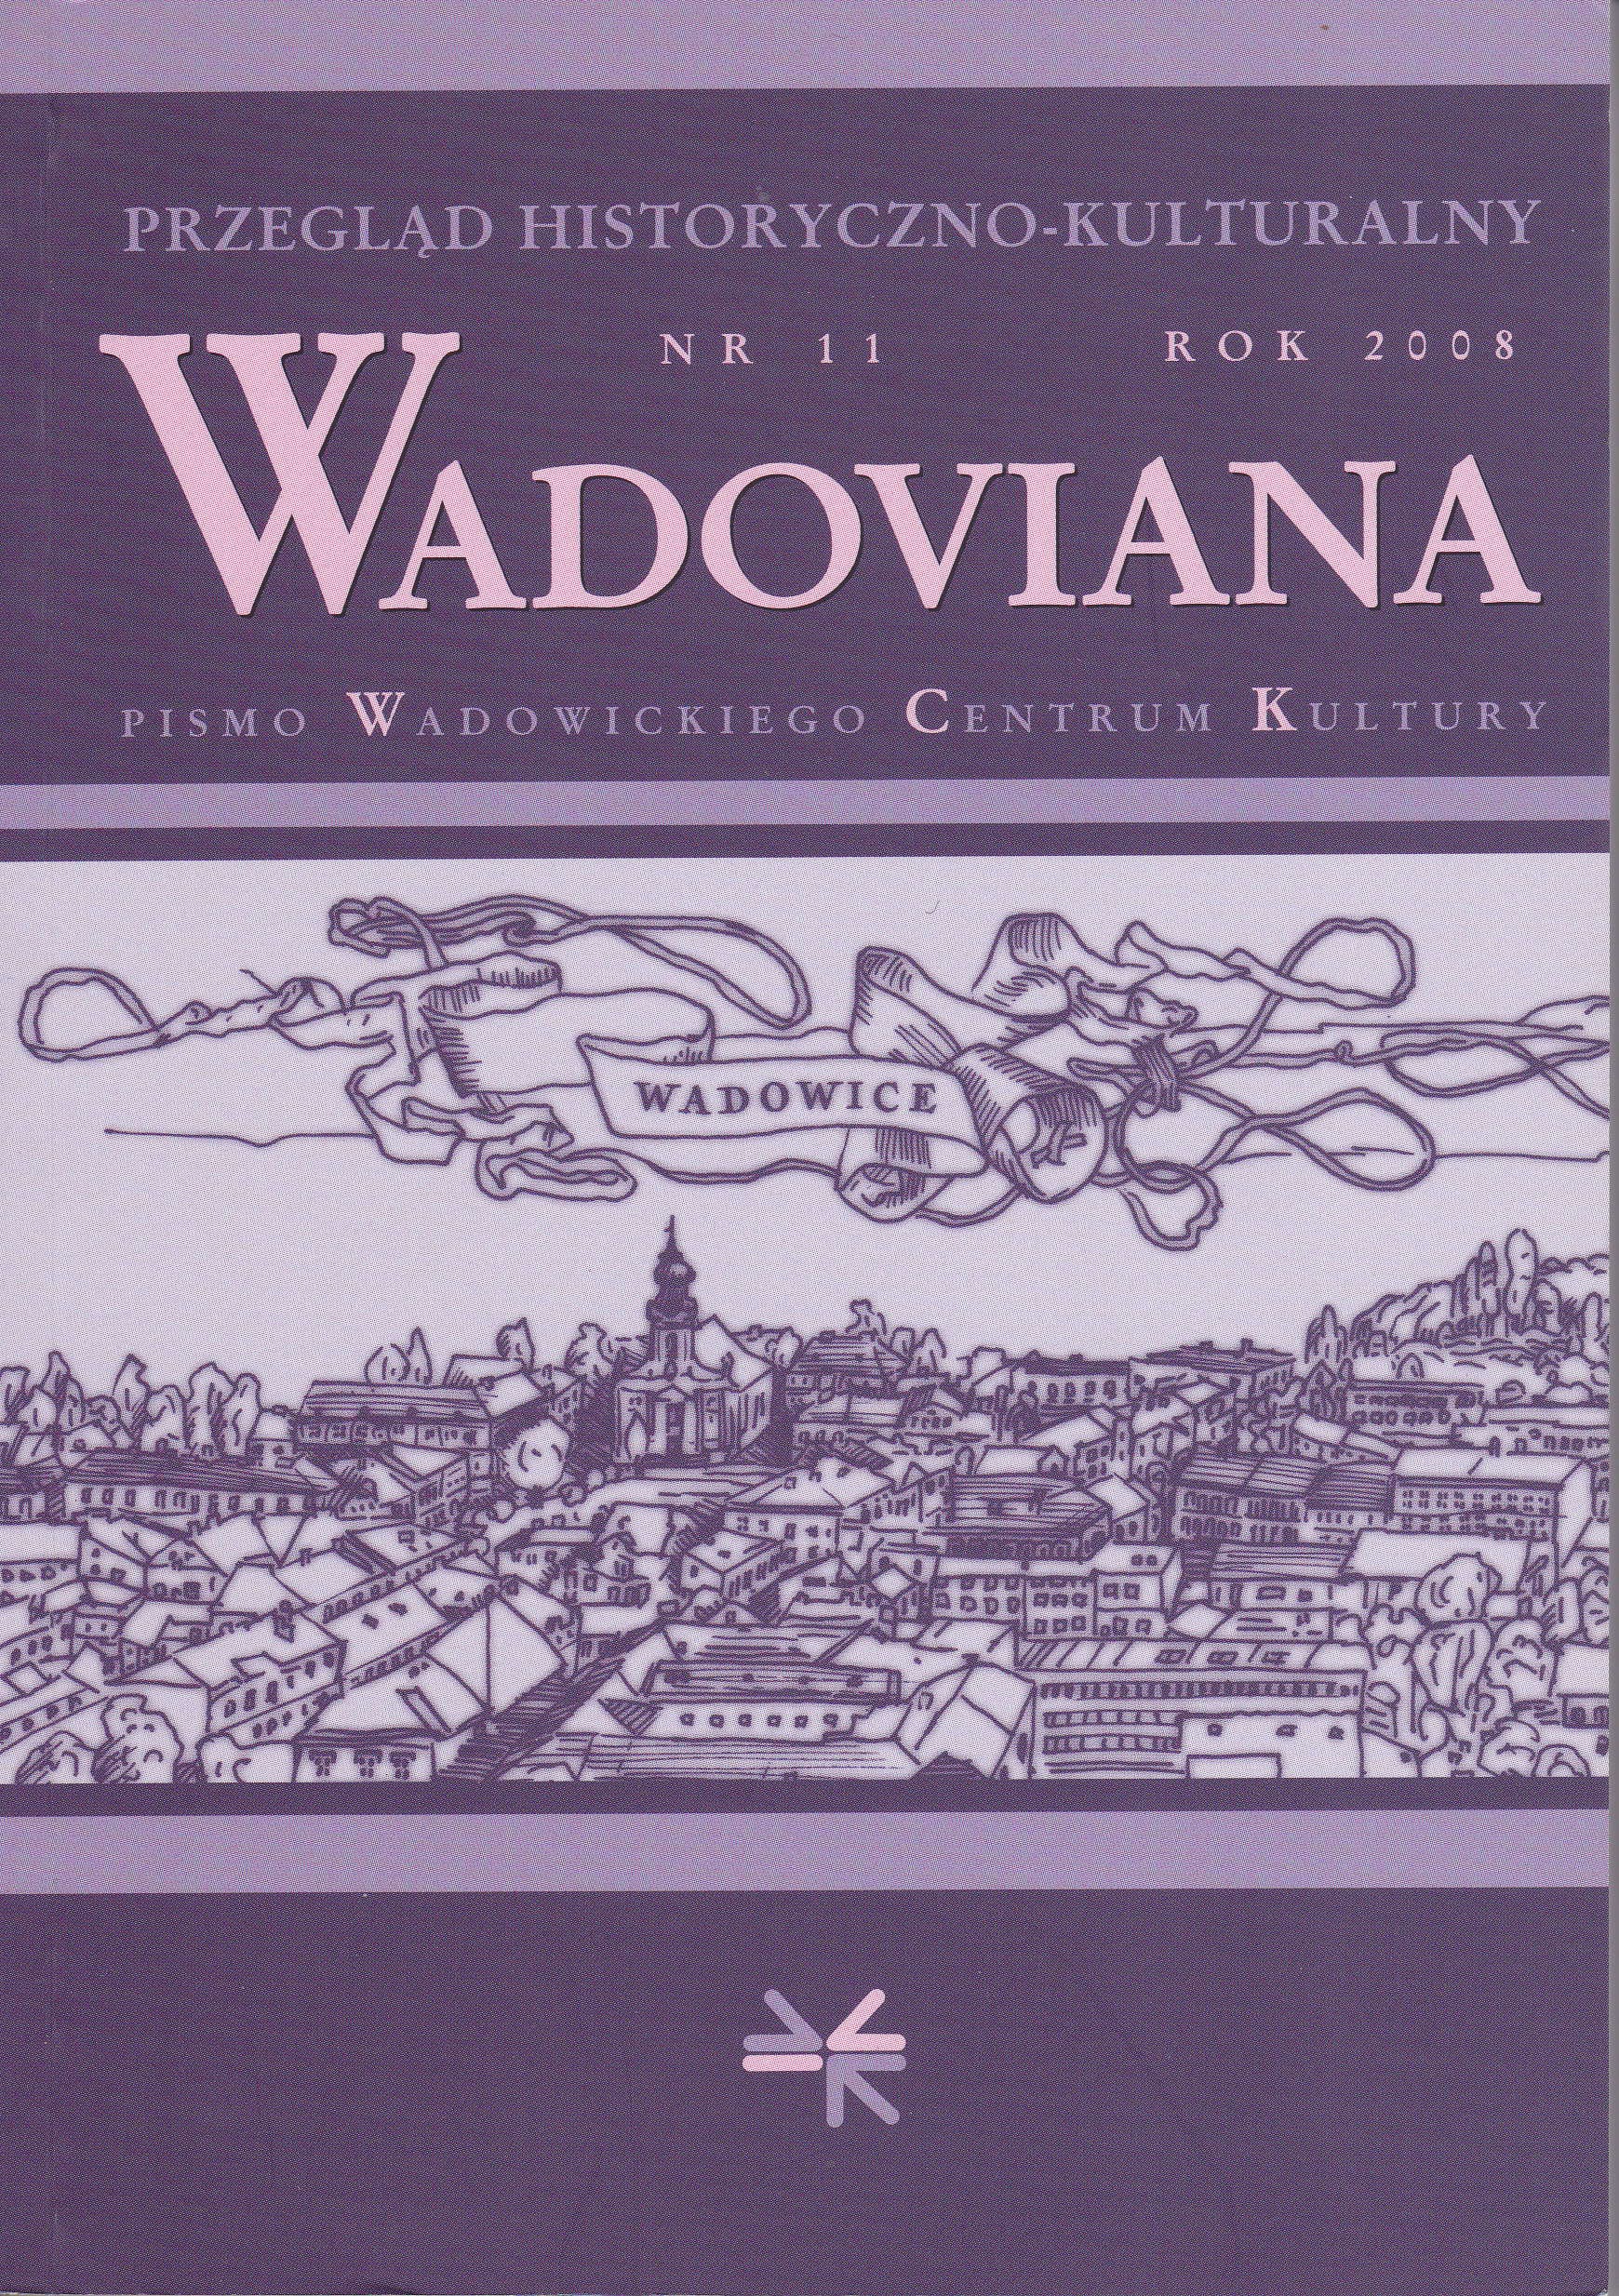 The structure and functioning of the named organization: Towarzystwo Upiększania Miasta Wadowic i Okolicy during the period of Galician autonomy Cover Image